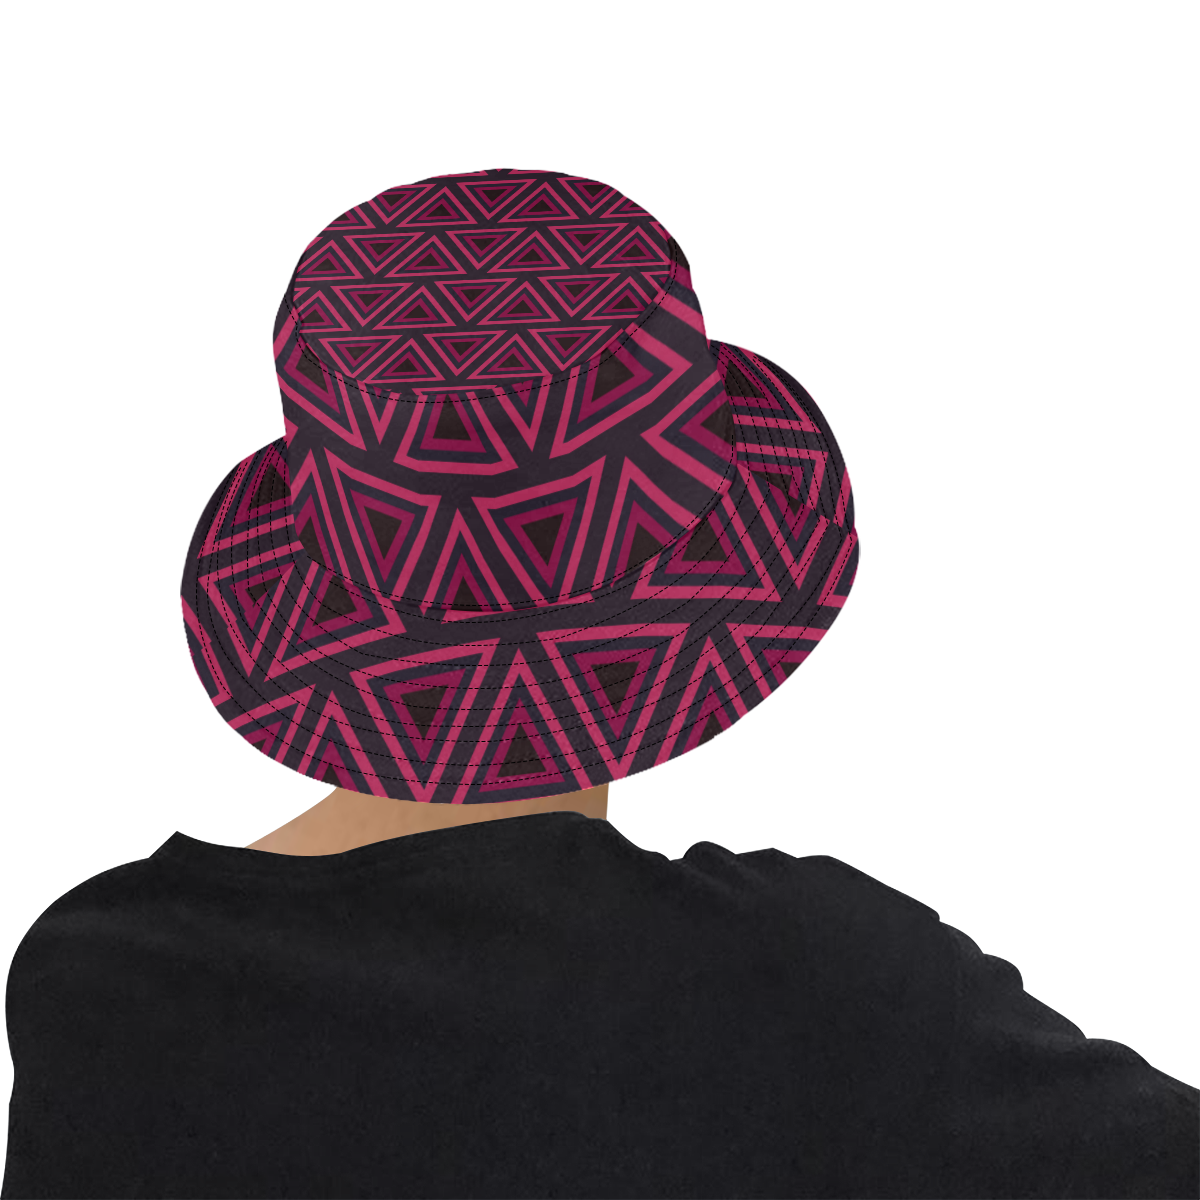 Tribal Ethnic Triangles All Over Print Bucket Hat for Men